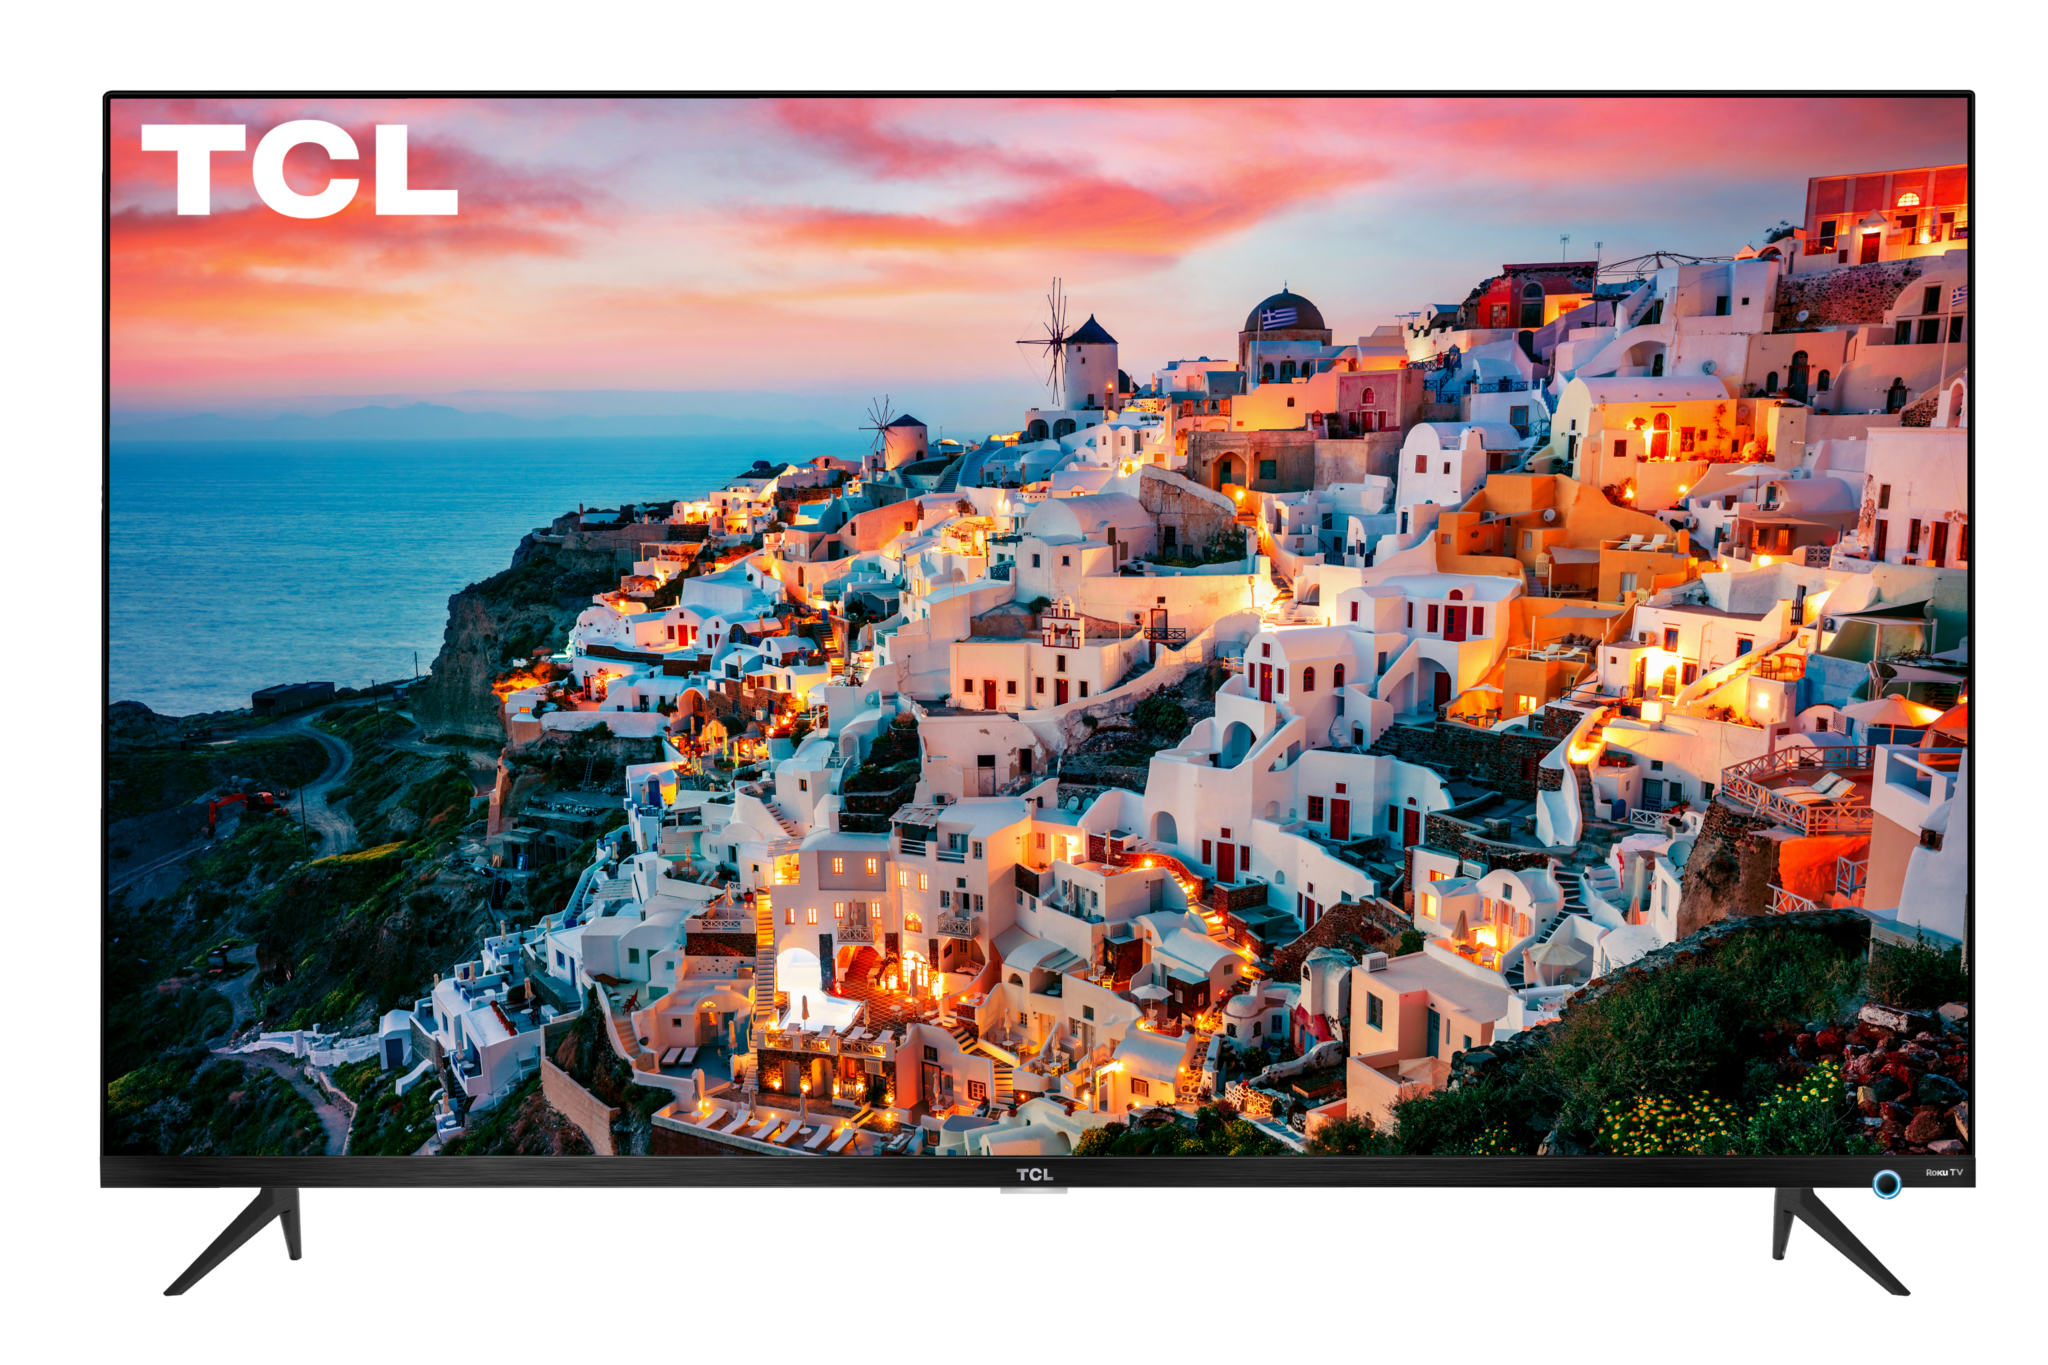 Everything We Know About TCL’s New Free Streaming Service With Over 200 Live Channels TCLtv+